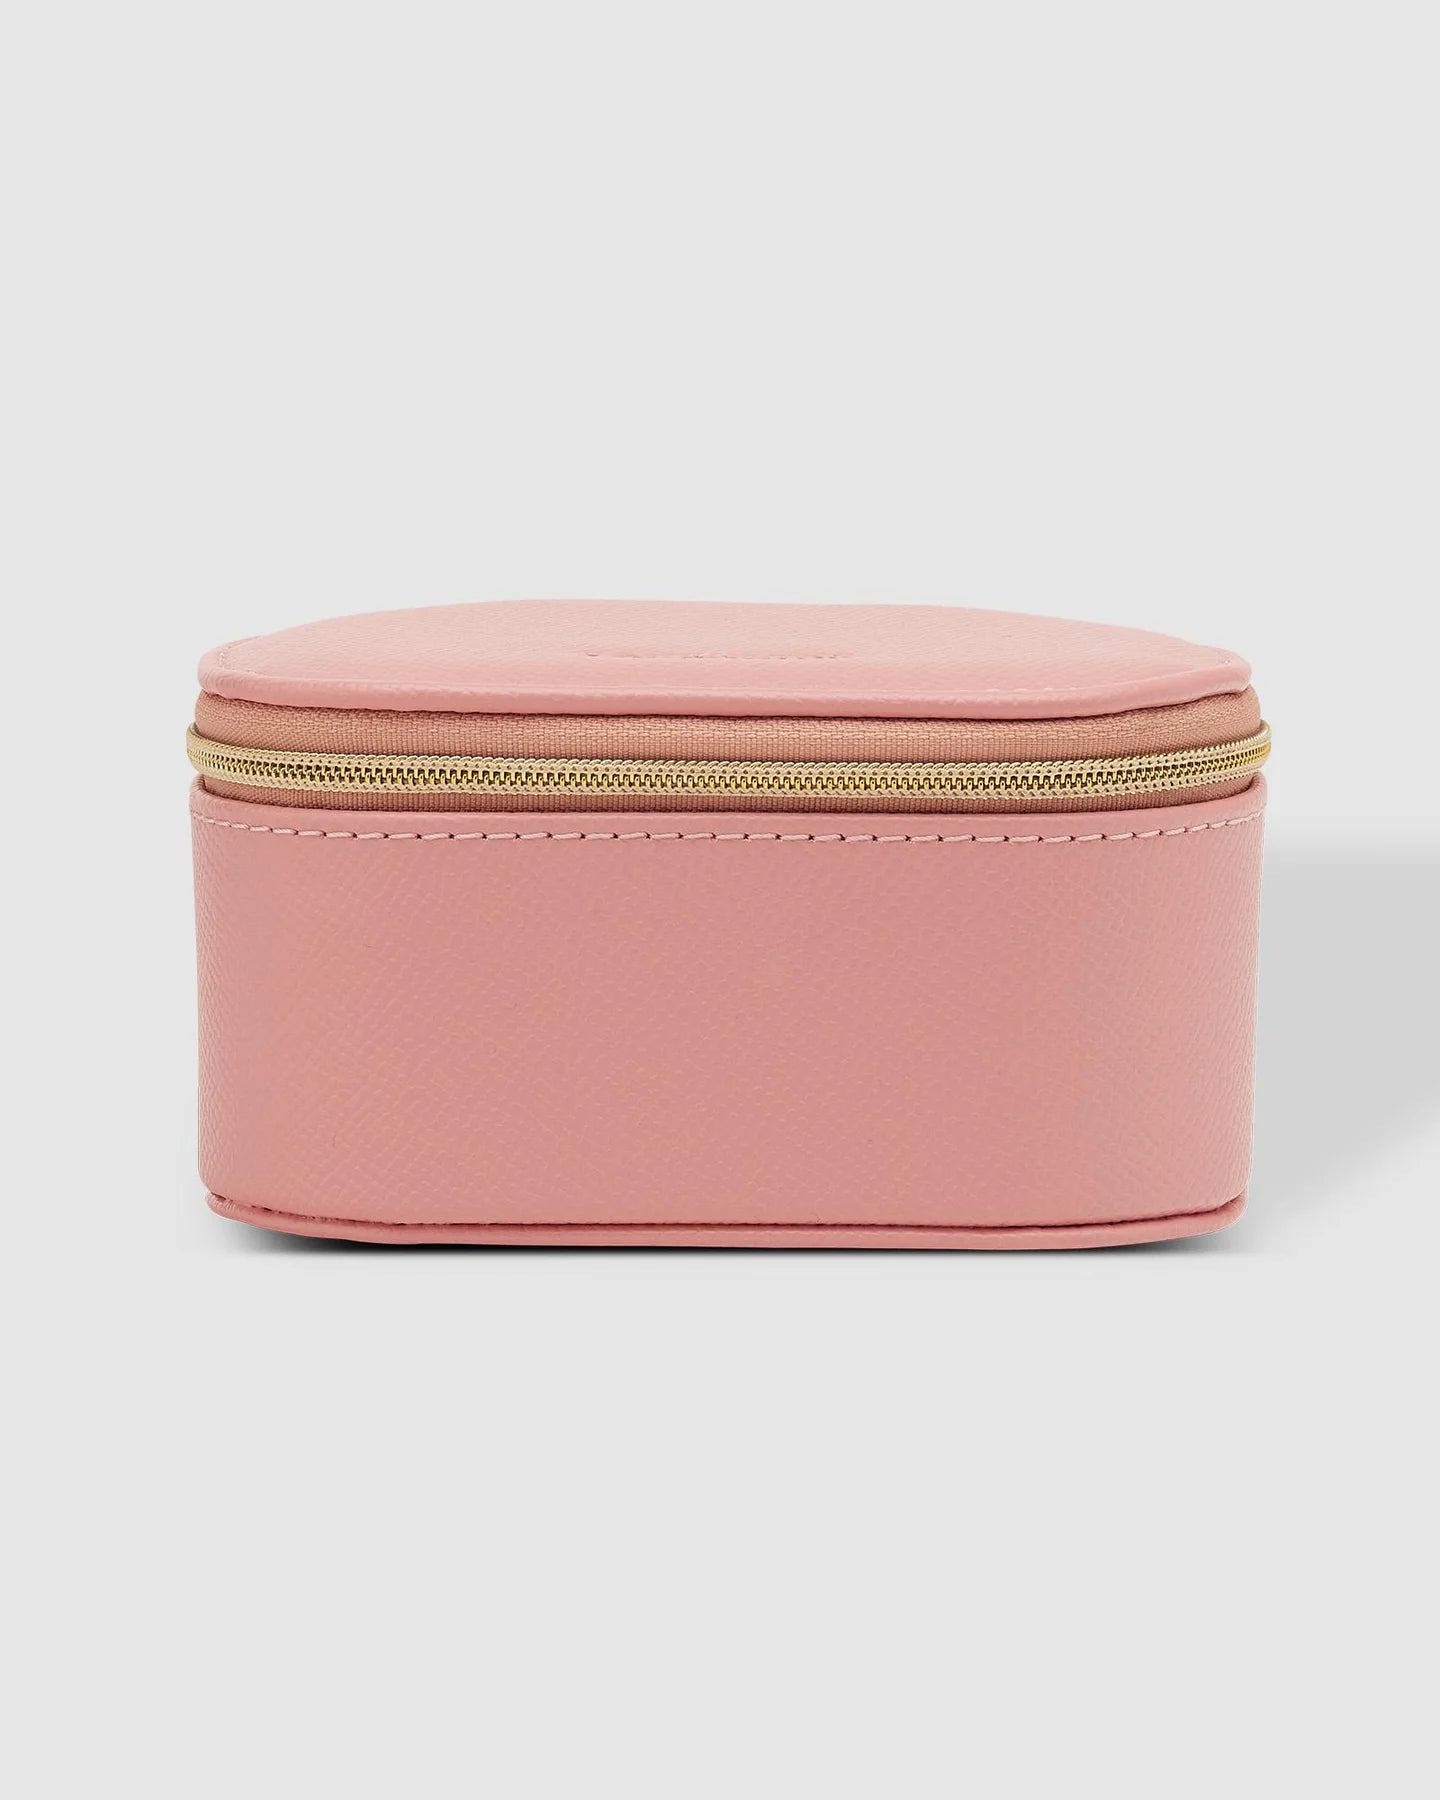 Olive Jewellery Box (Pink) - Something For Me​​